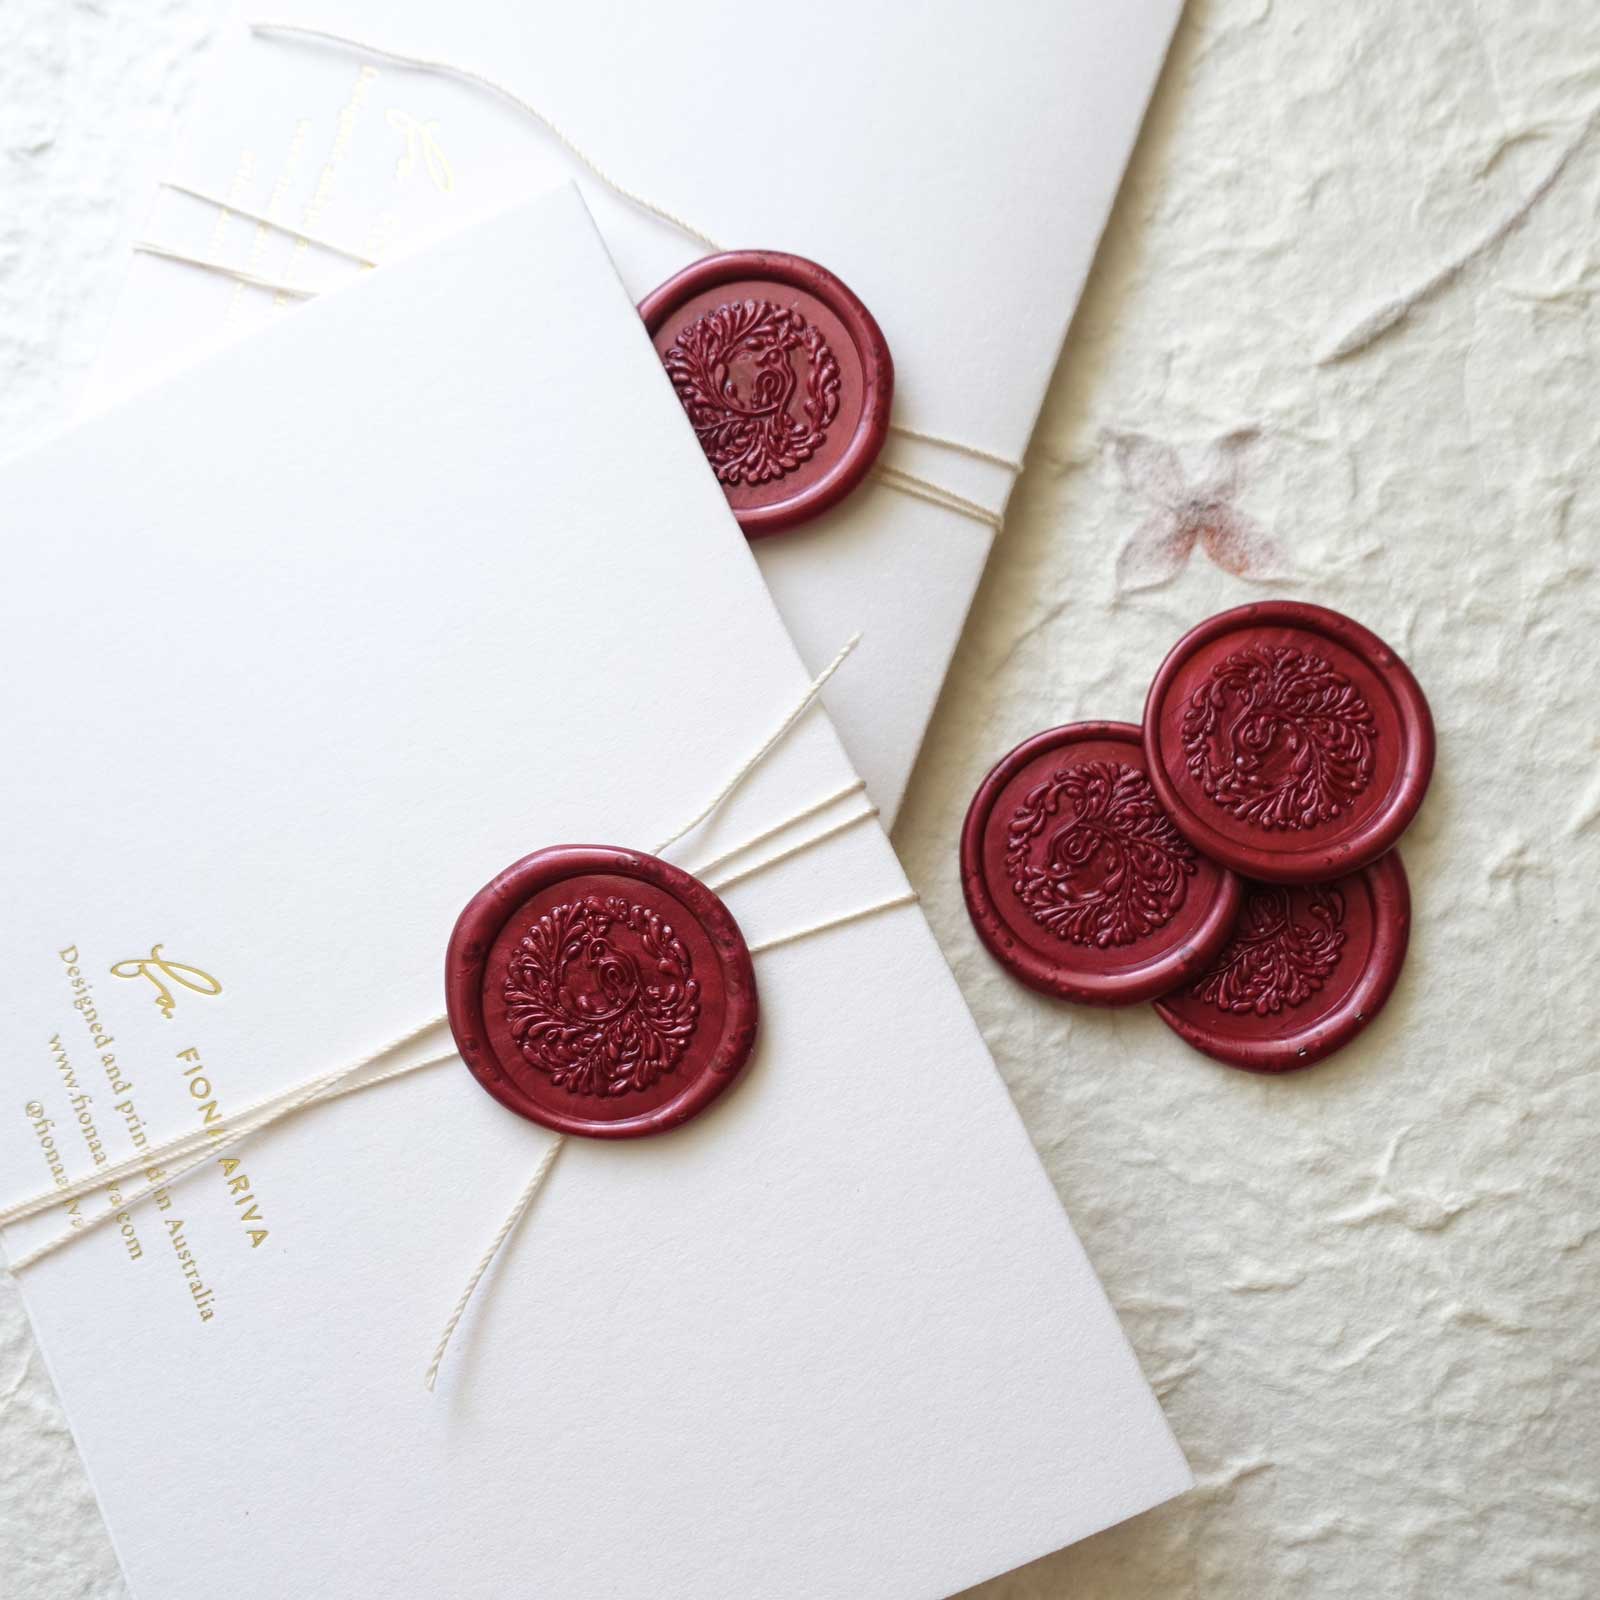 Song bird peacock wax seal stamp, wax seal kit or stamp head